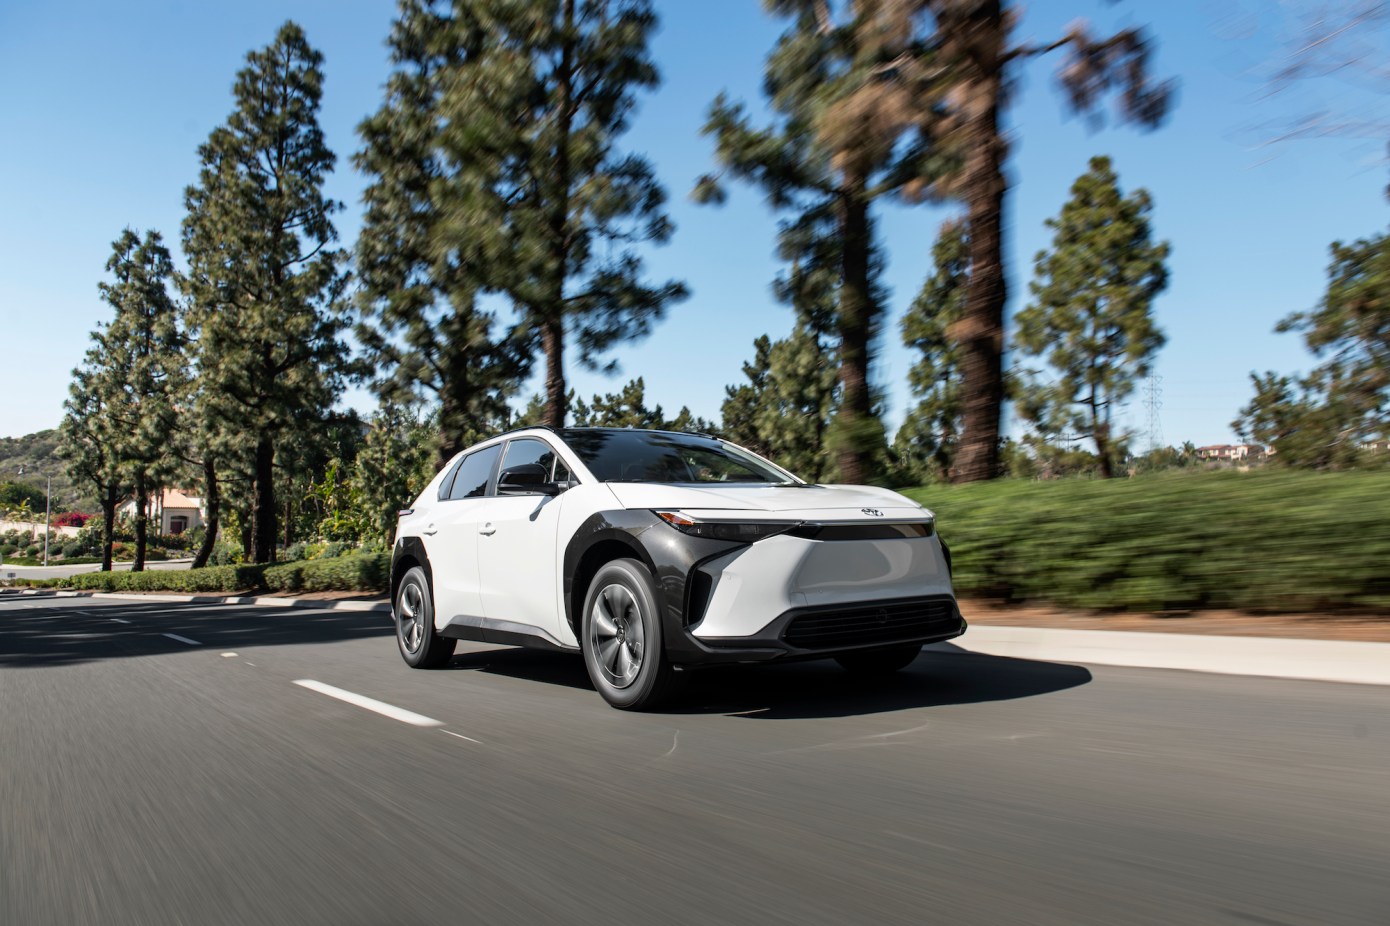 Toyota used up all its EV tax credits on hybrids